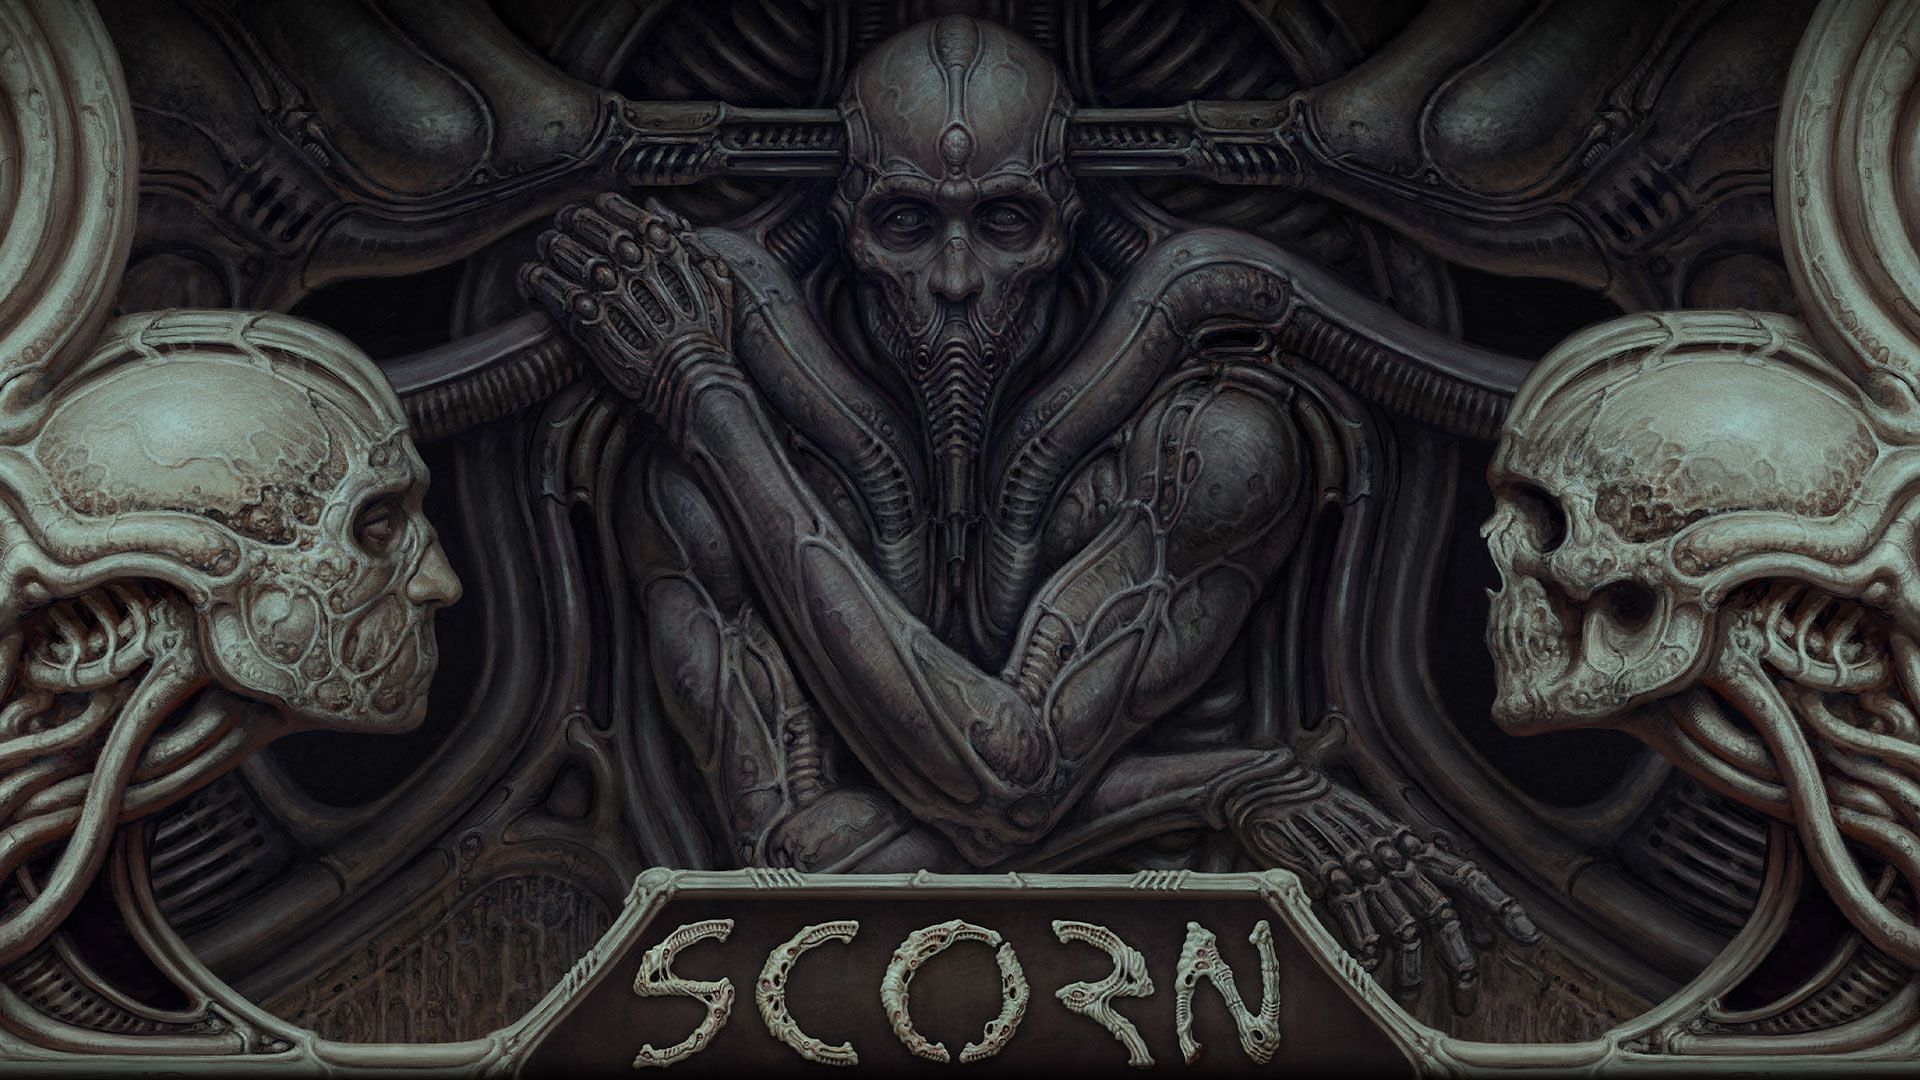 Scorn is coming soon, and here